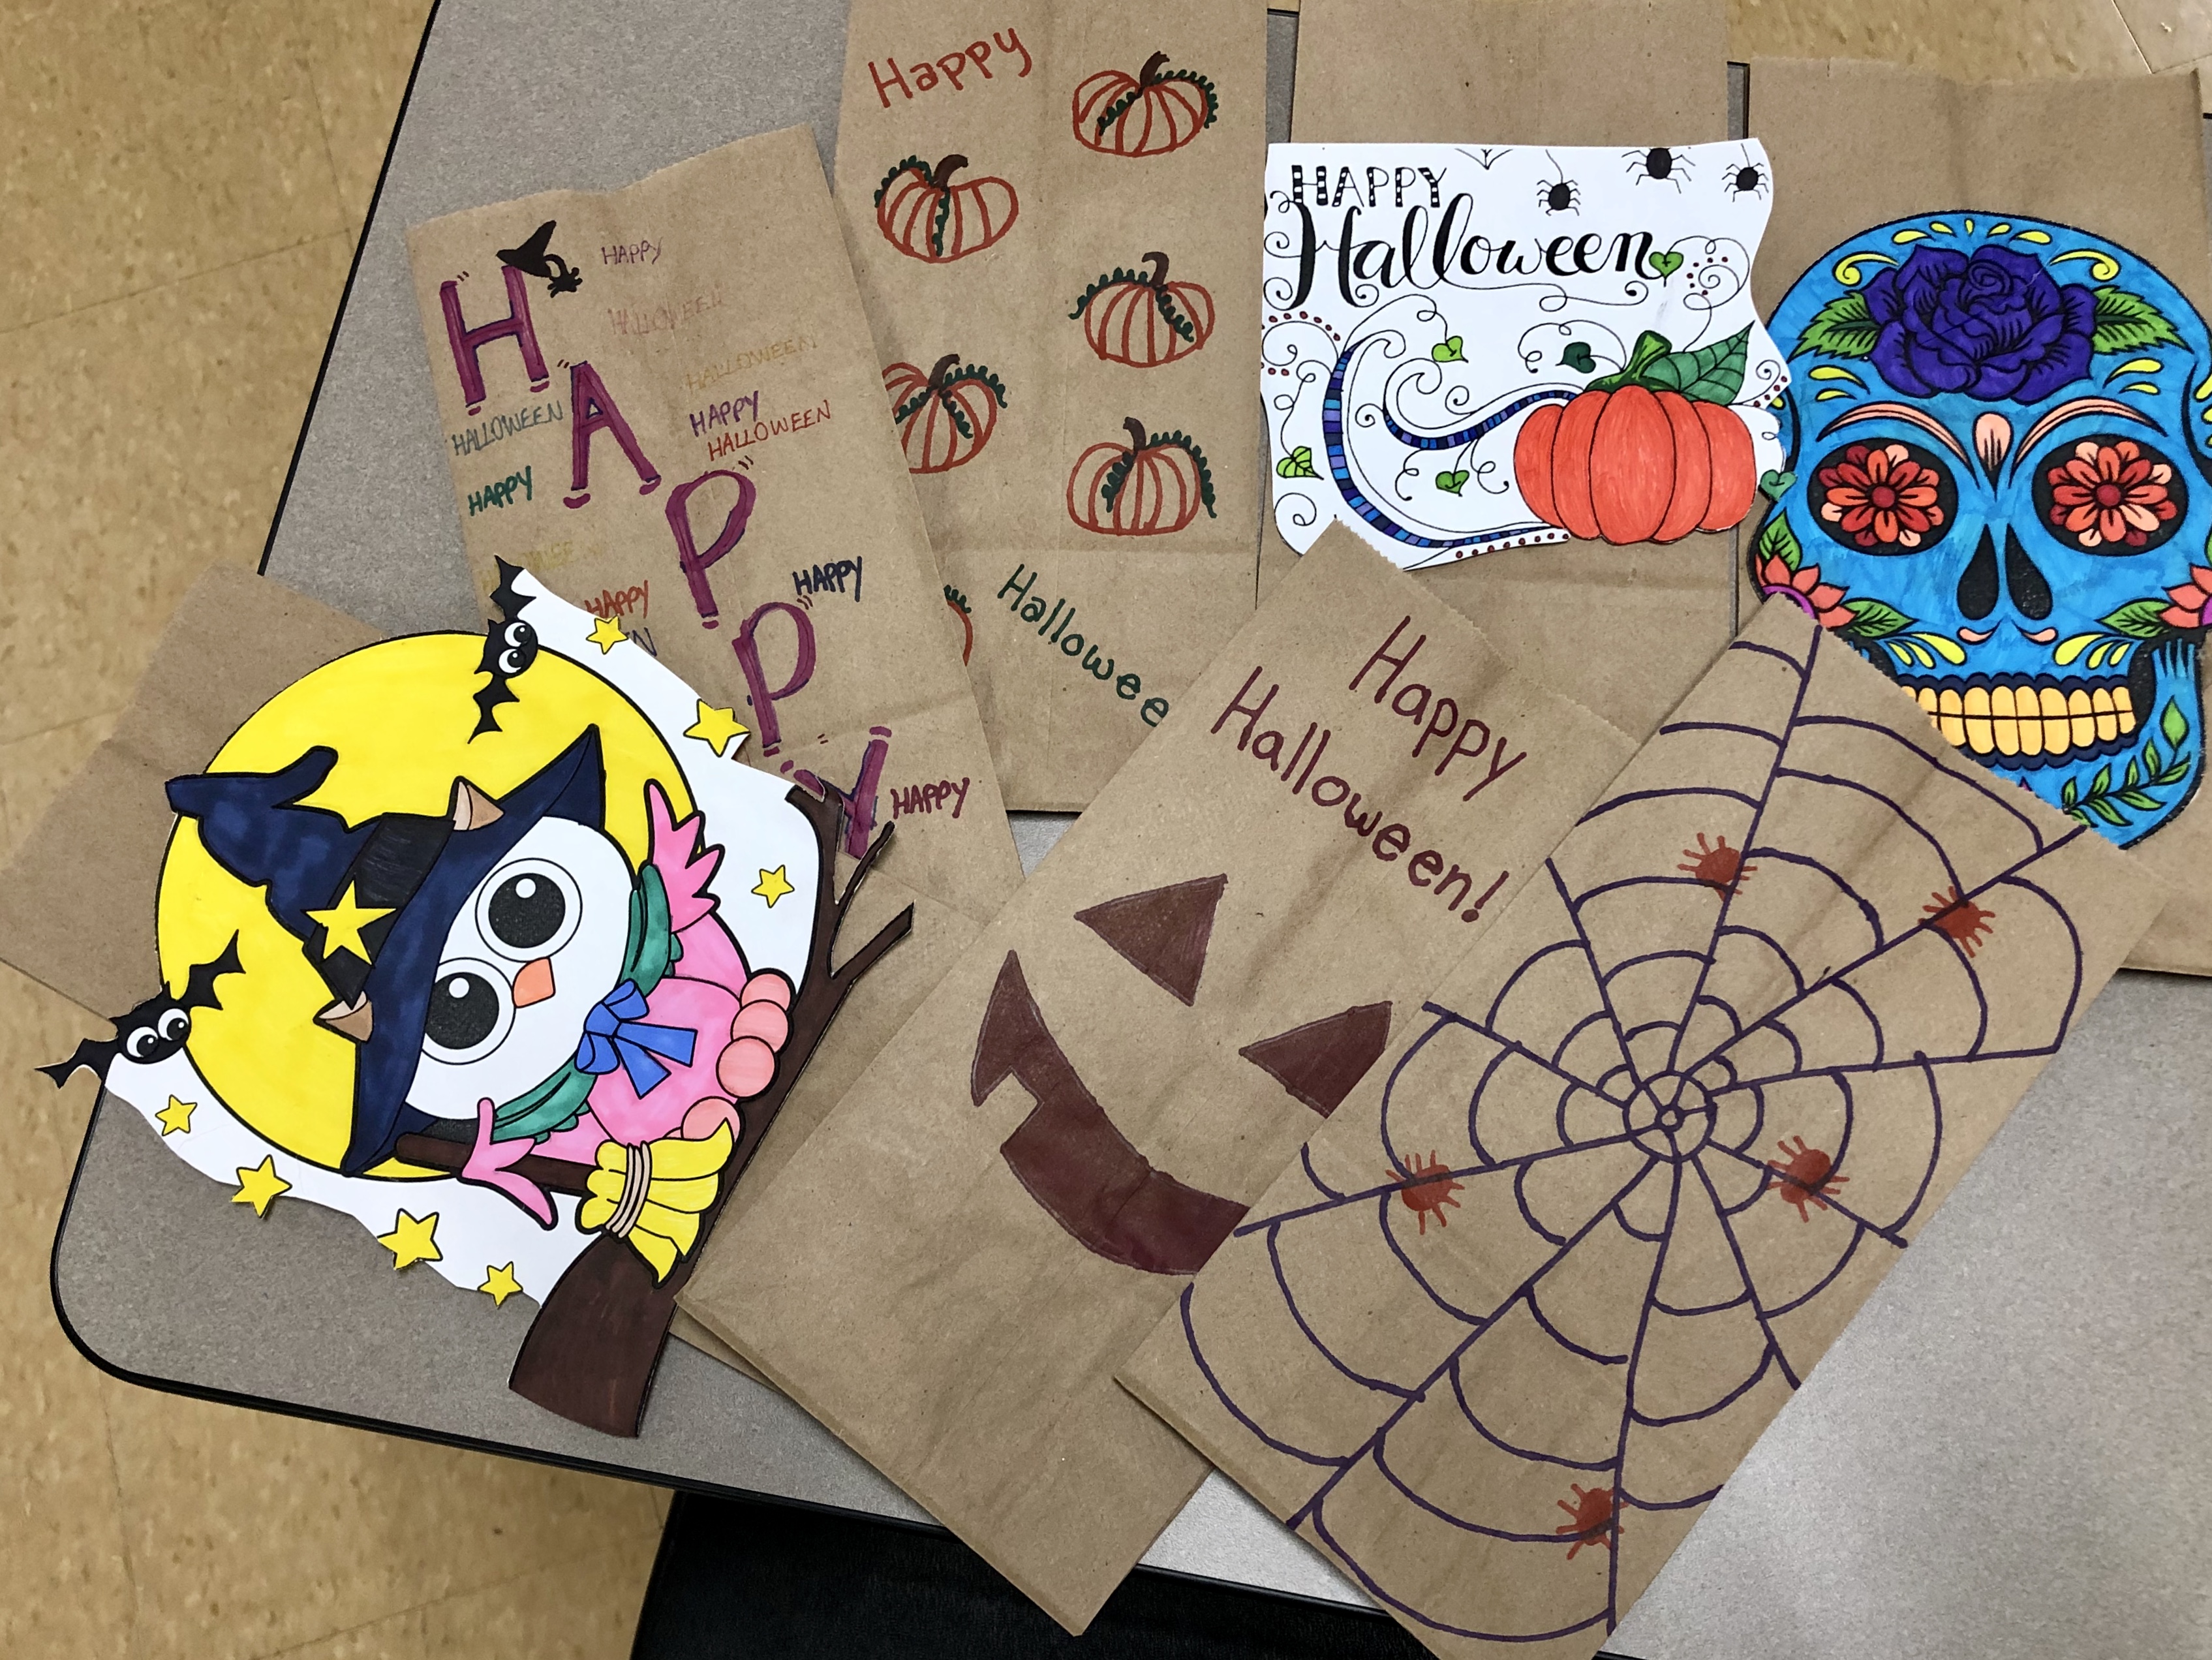 Samples of the creative gift bags